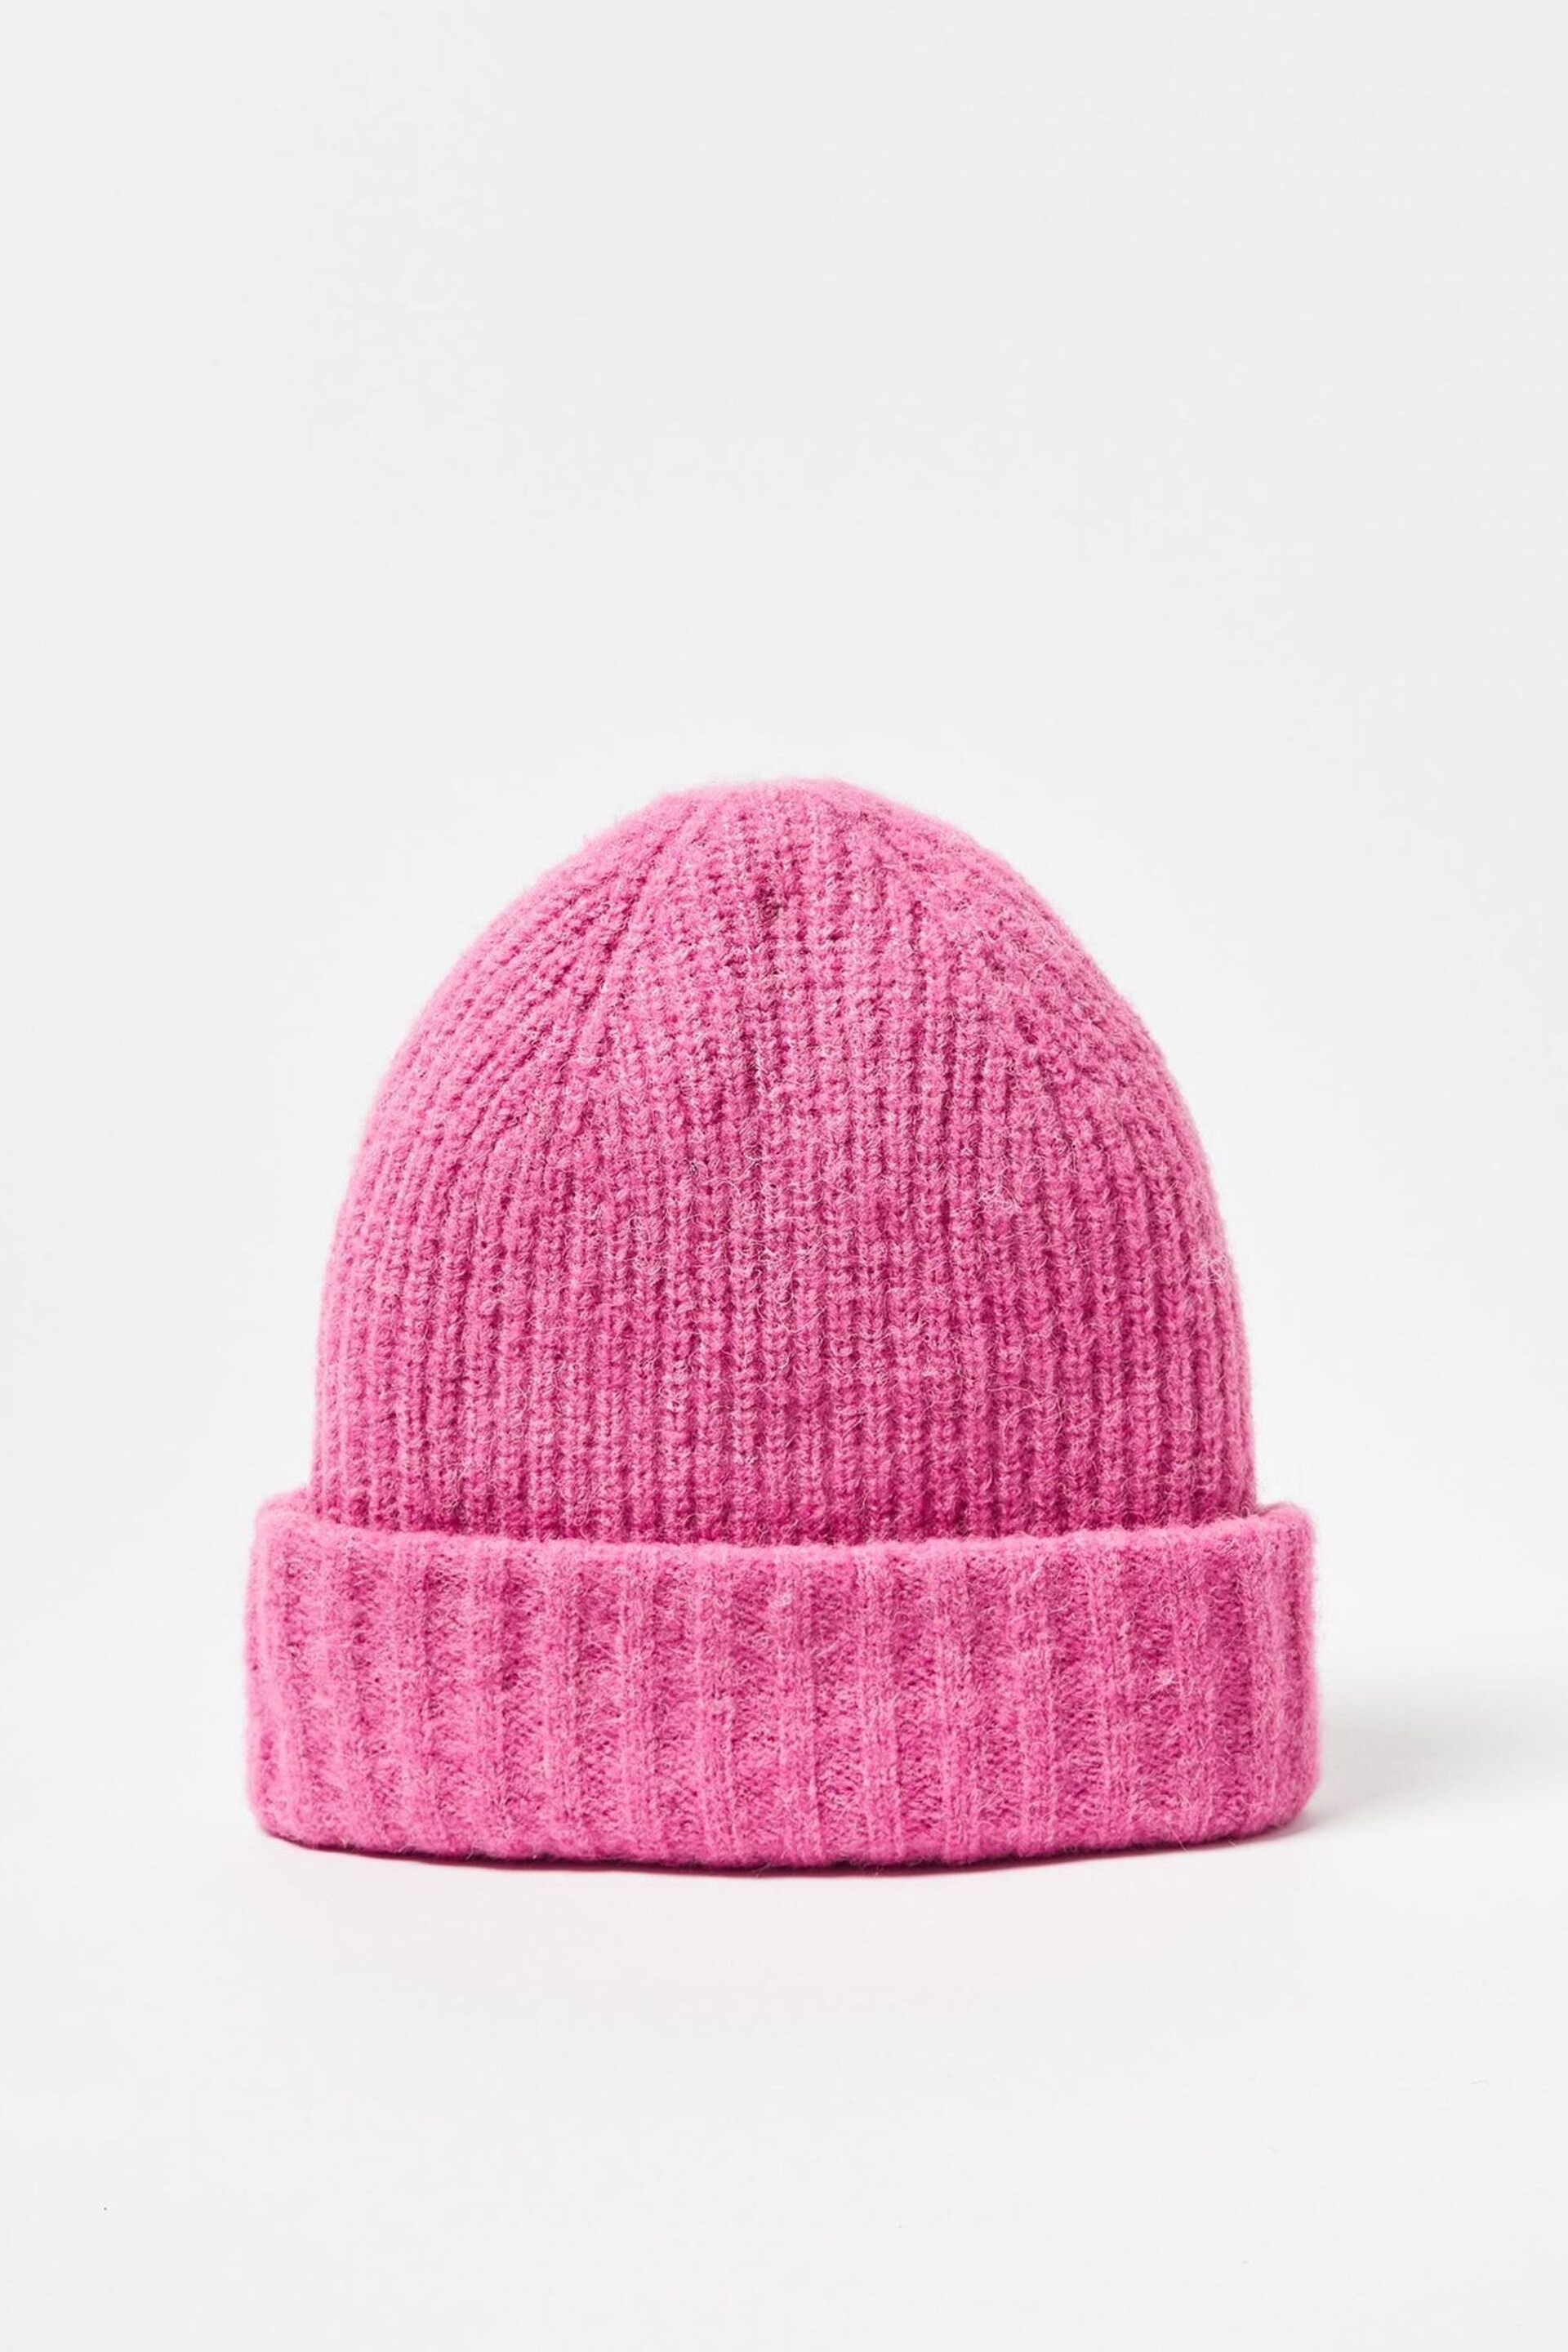 Oliver Bonas Pink Rib Knitted Beanie Hat - Image 2 of 4